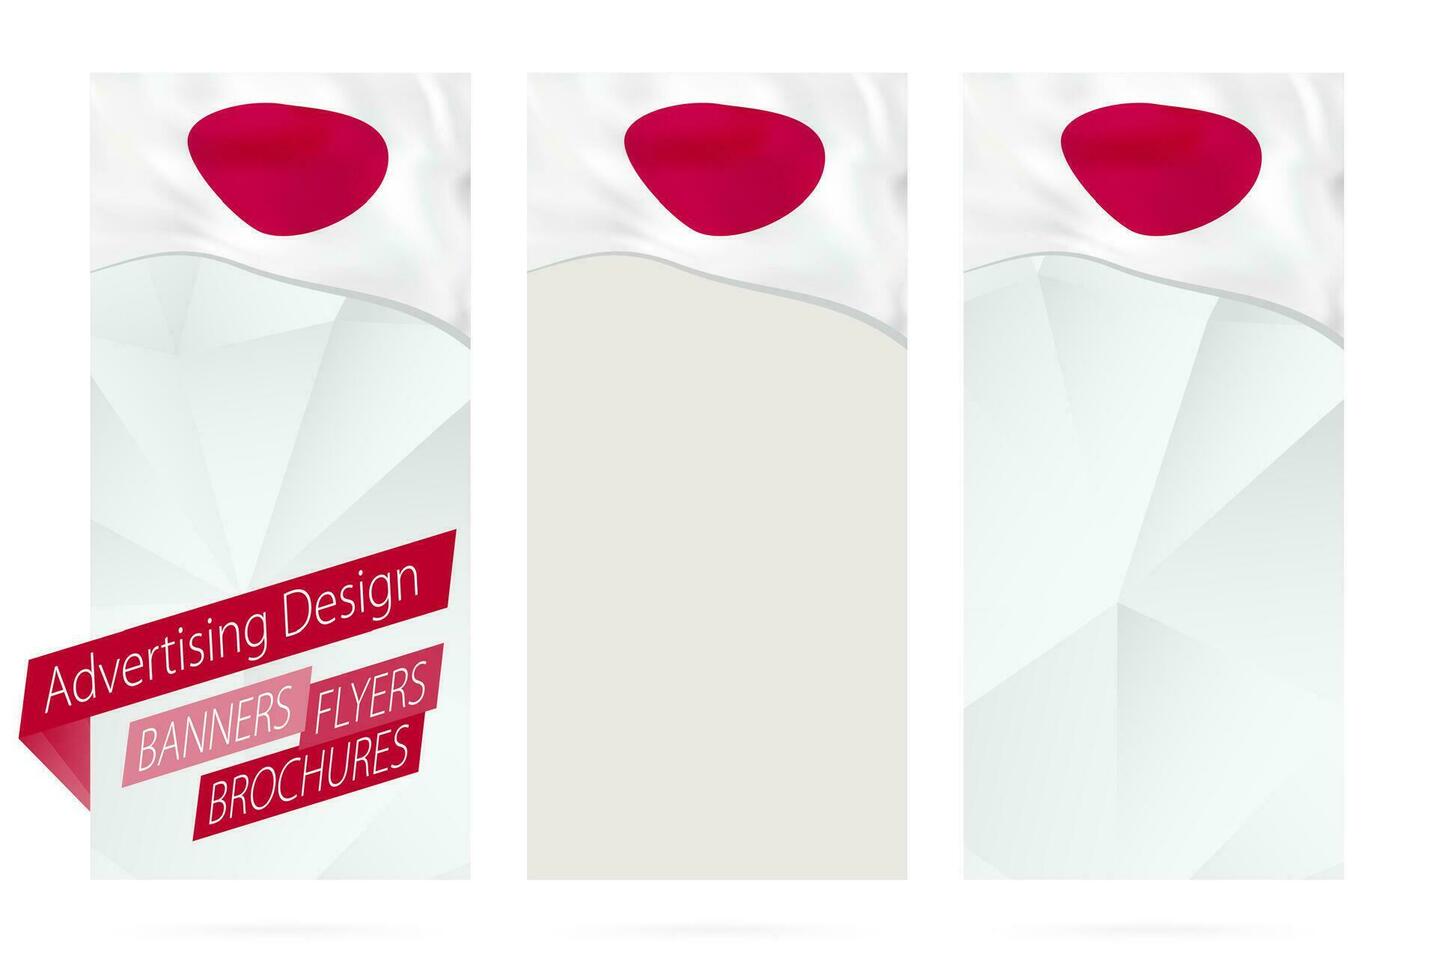 Design of banners, flyers, brochures with flag of Japan. vector